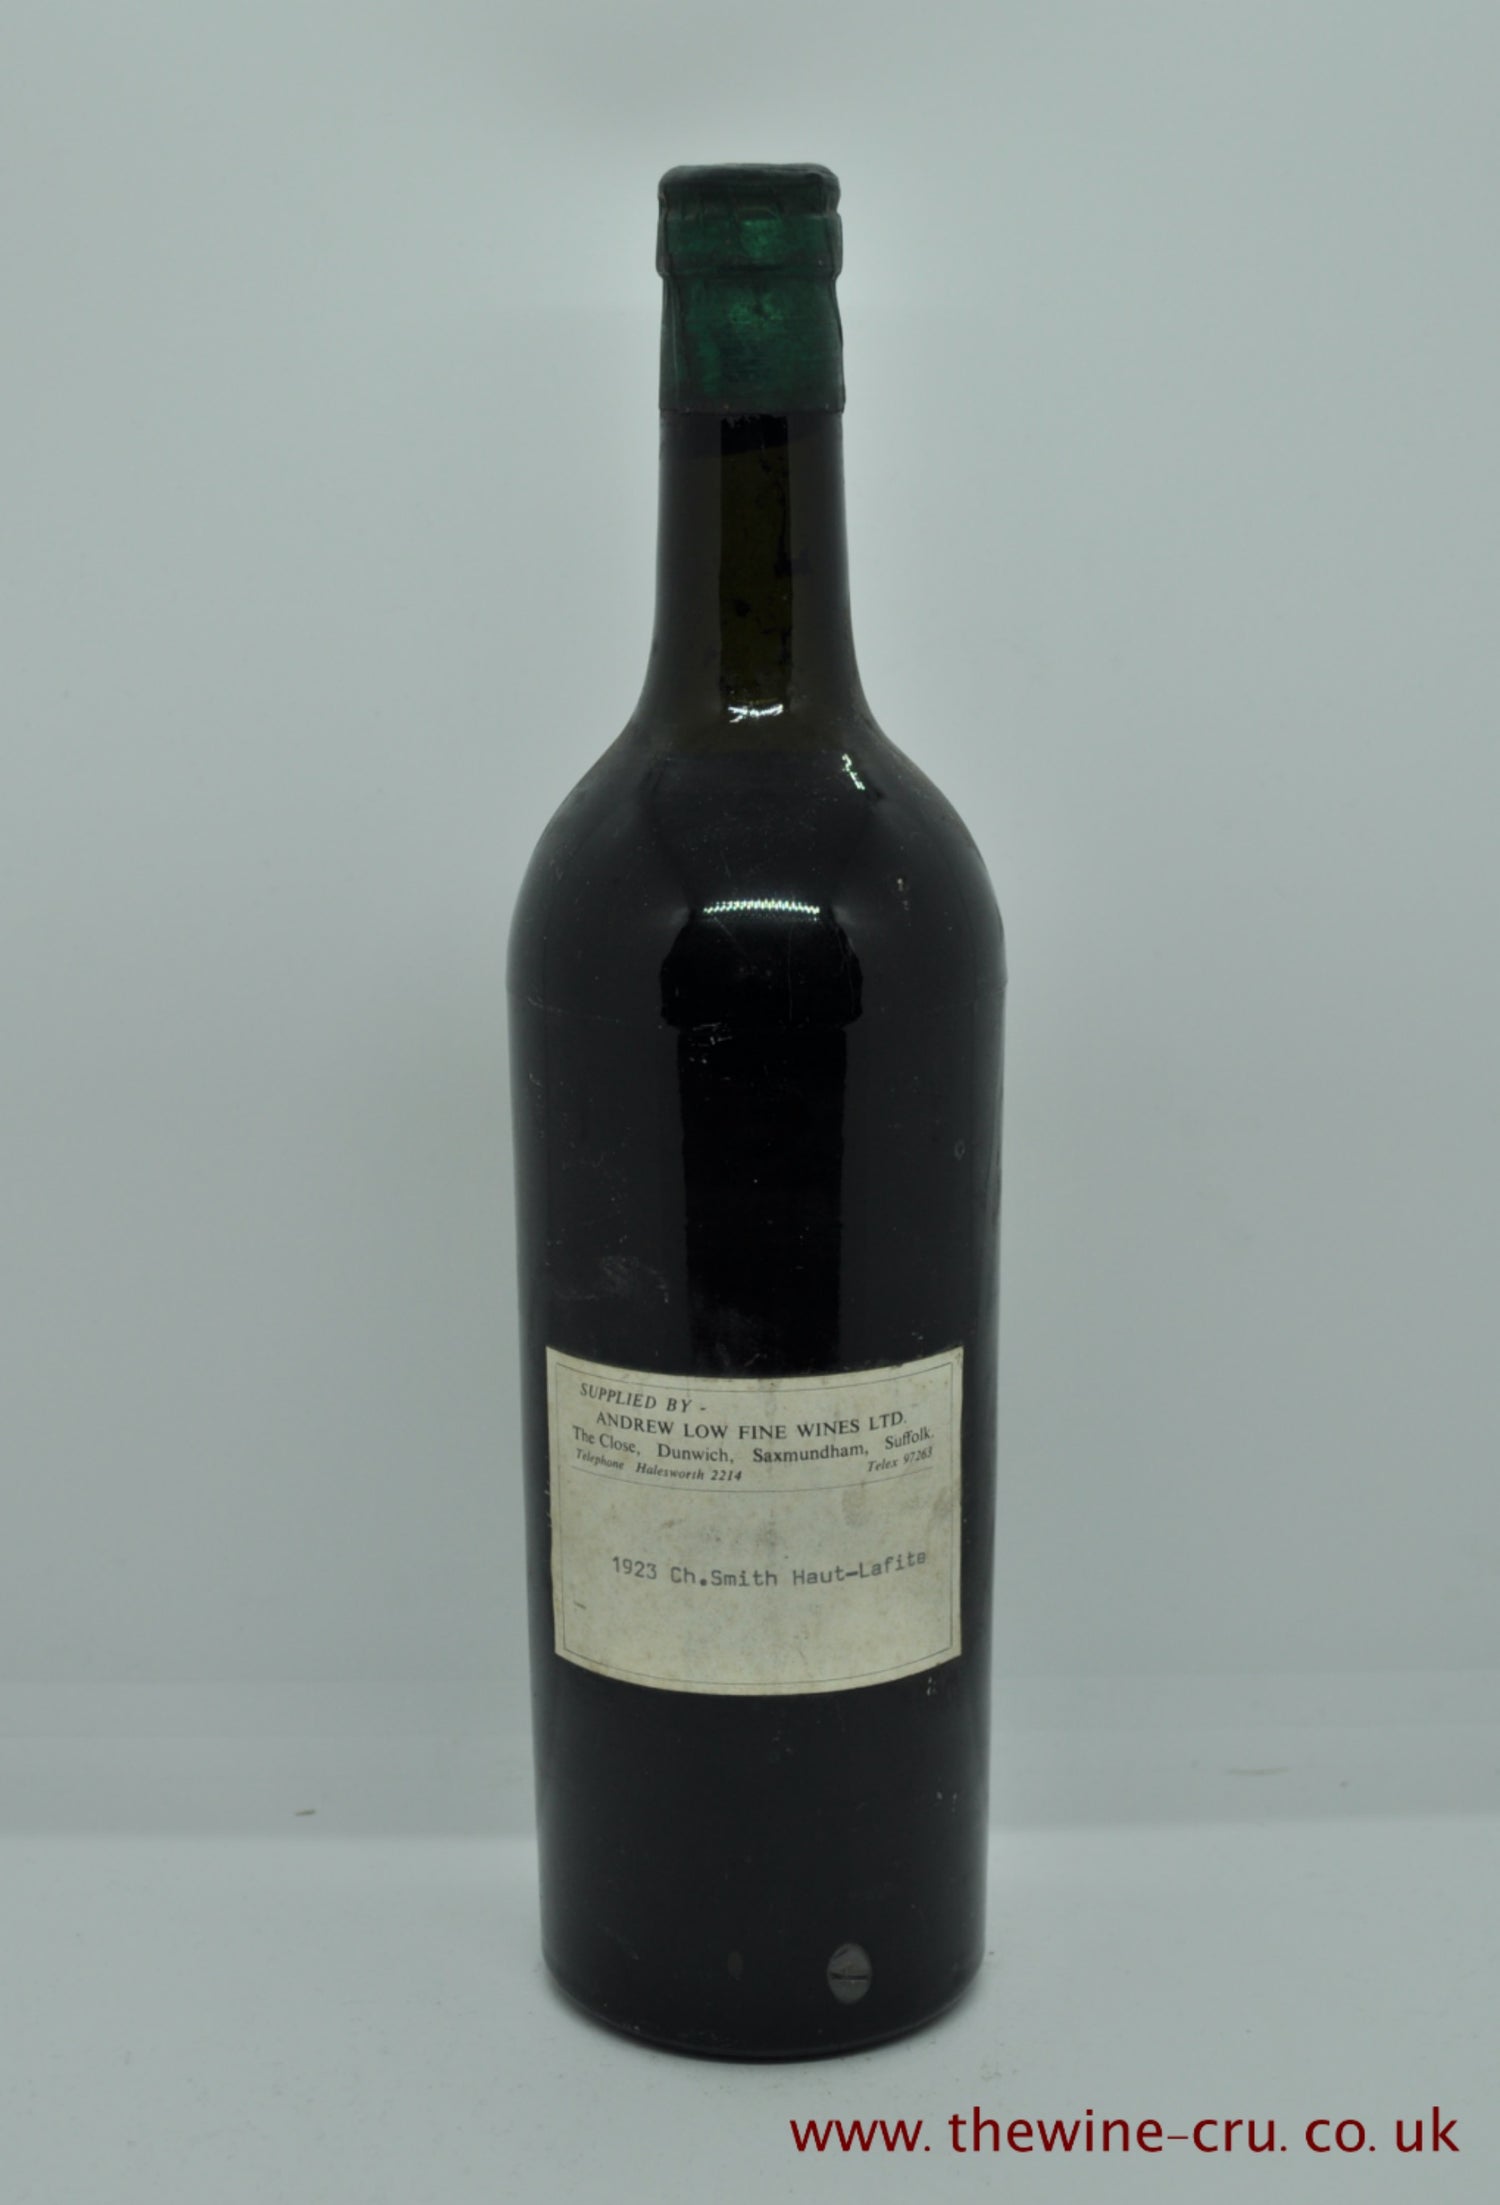 A single 1923 bottle of vintage red wine. Chateau Smith Haut lafite. France, Bordeaux. The bottle is in good condition with a merchants label and a top shoulder level. Immediate delivery. Free local delivery. Gift wrapping available.